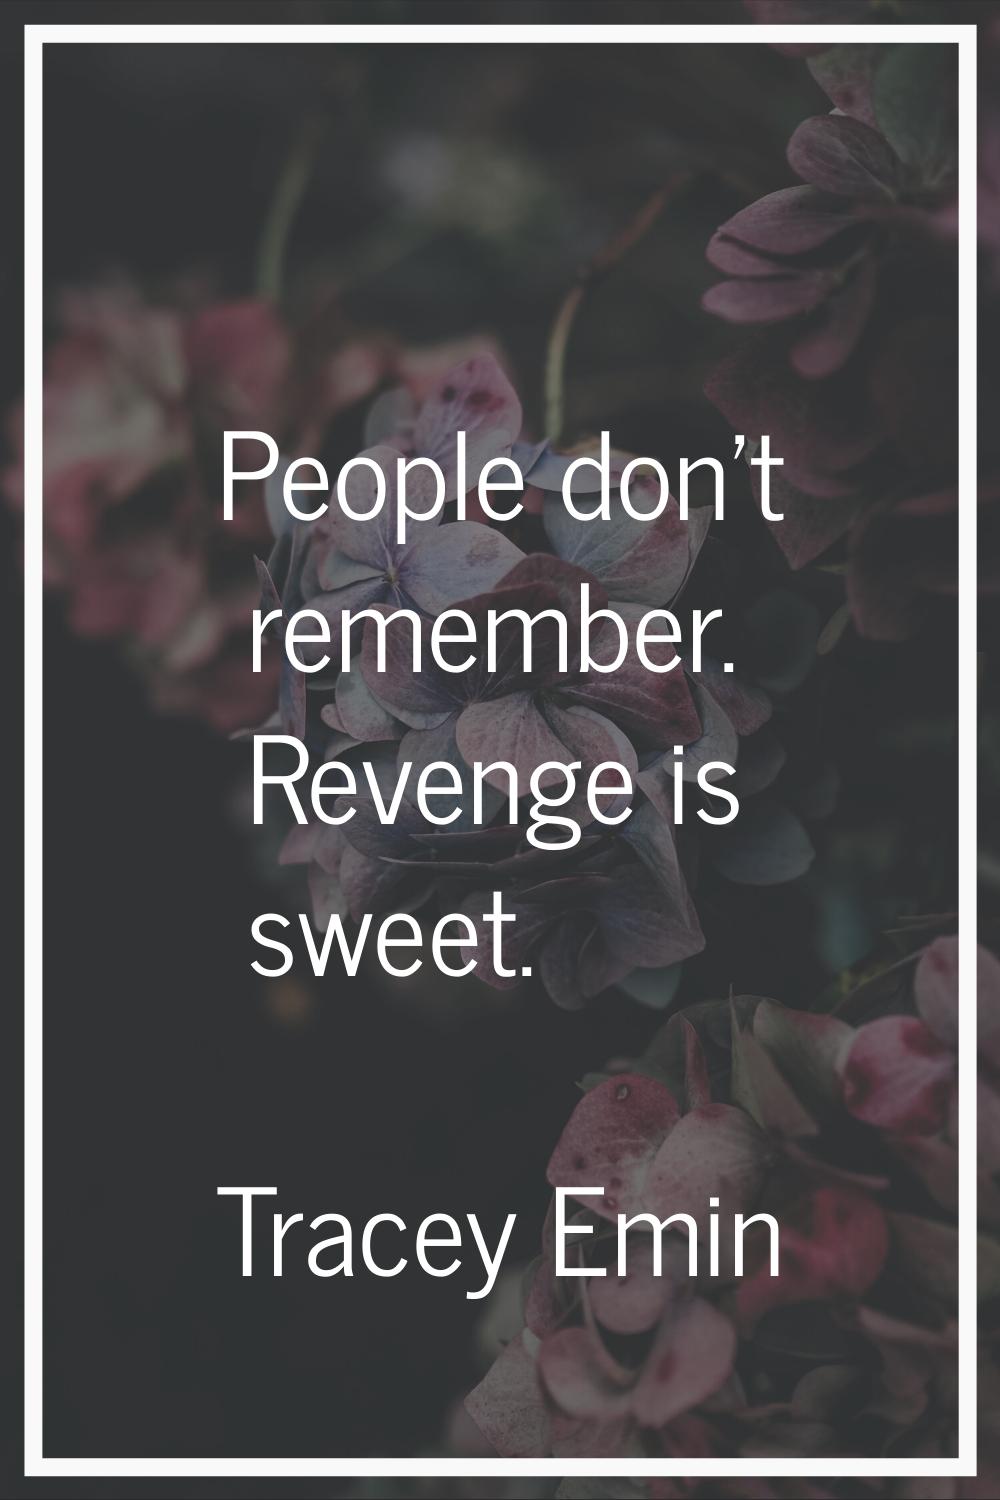 People don't remember. Revenge is sweet.